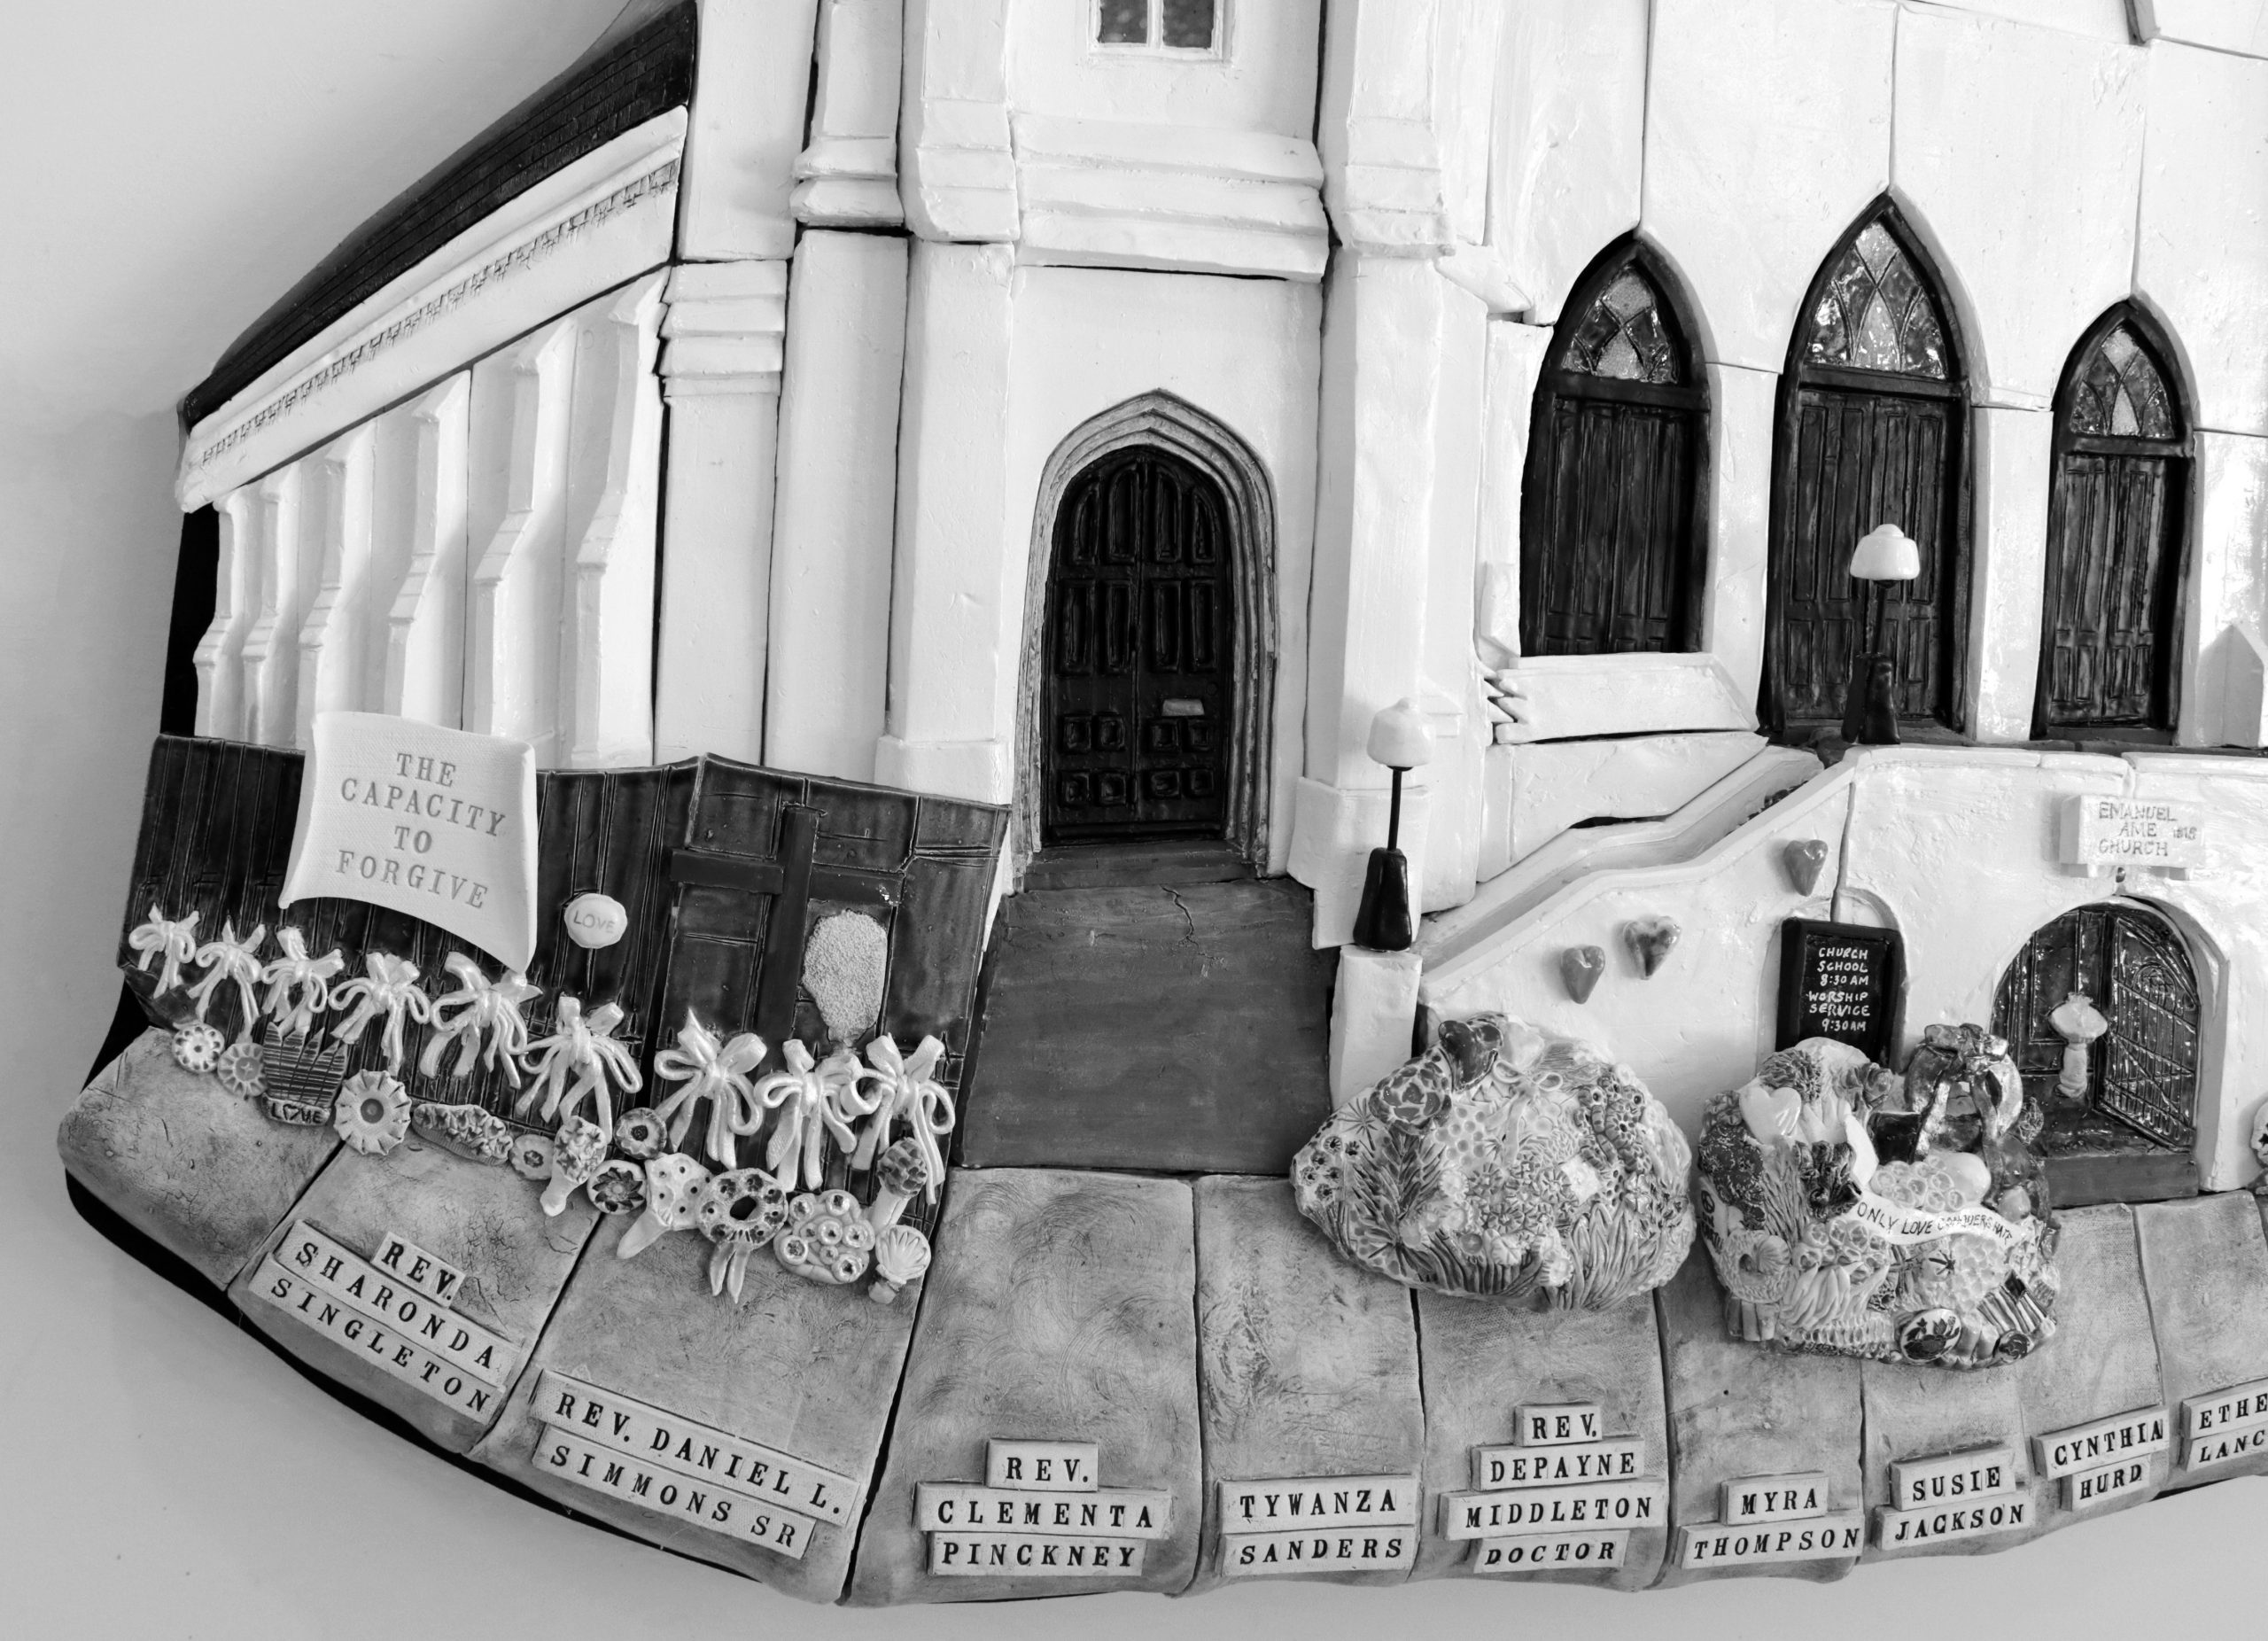 Tribute to the Emanuel AME Church and the Emanuel Nine